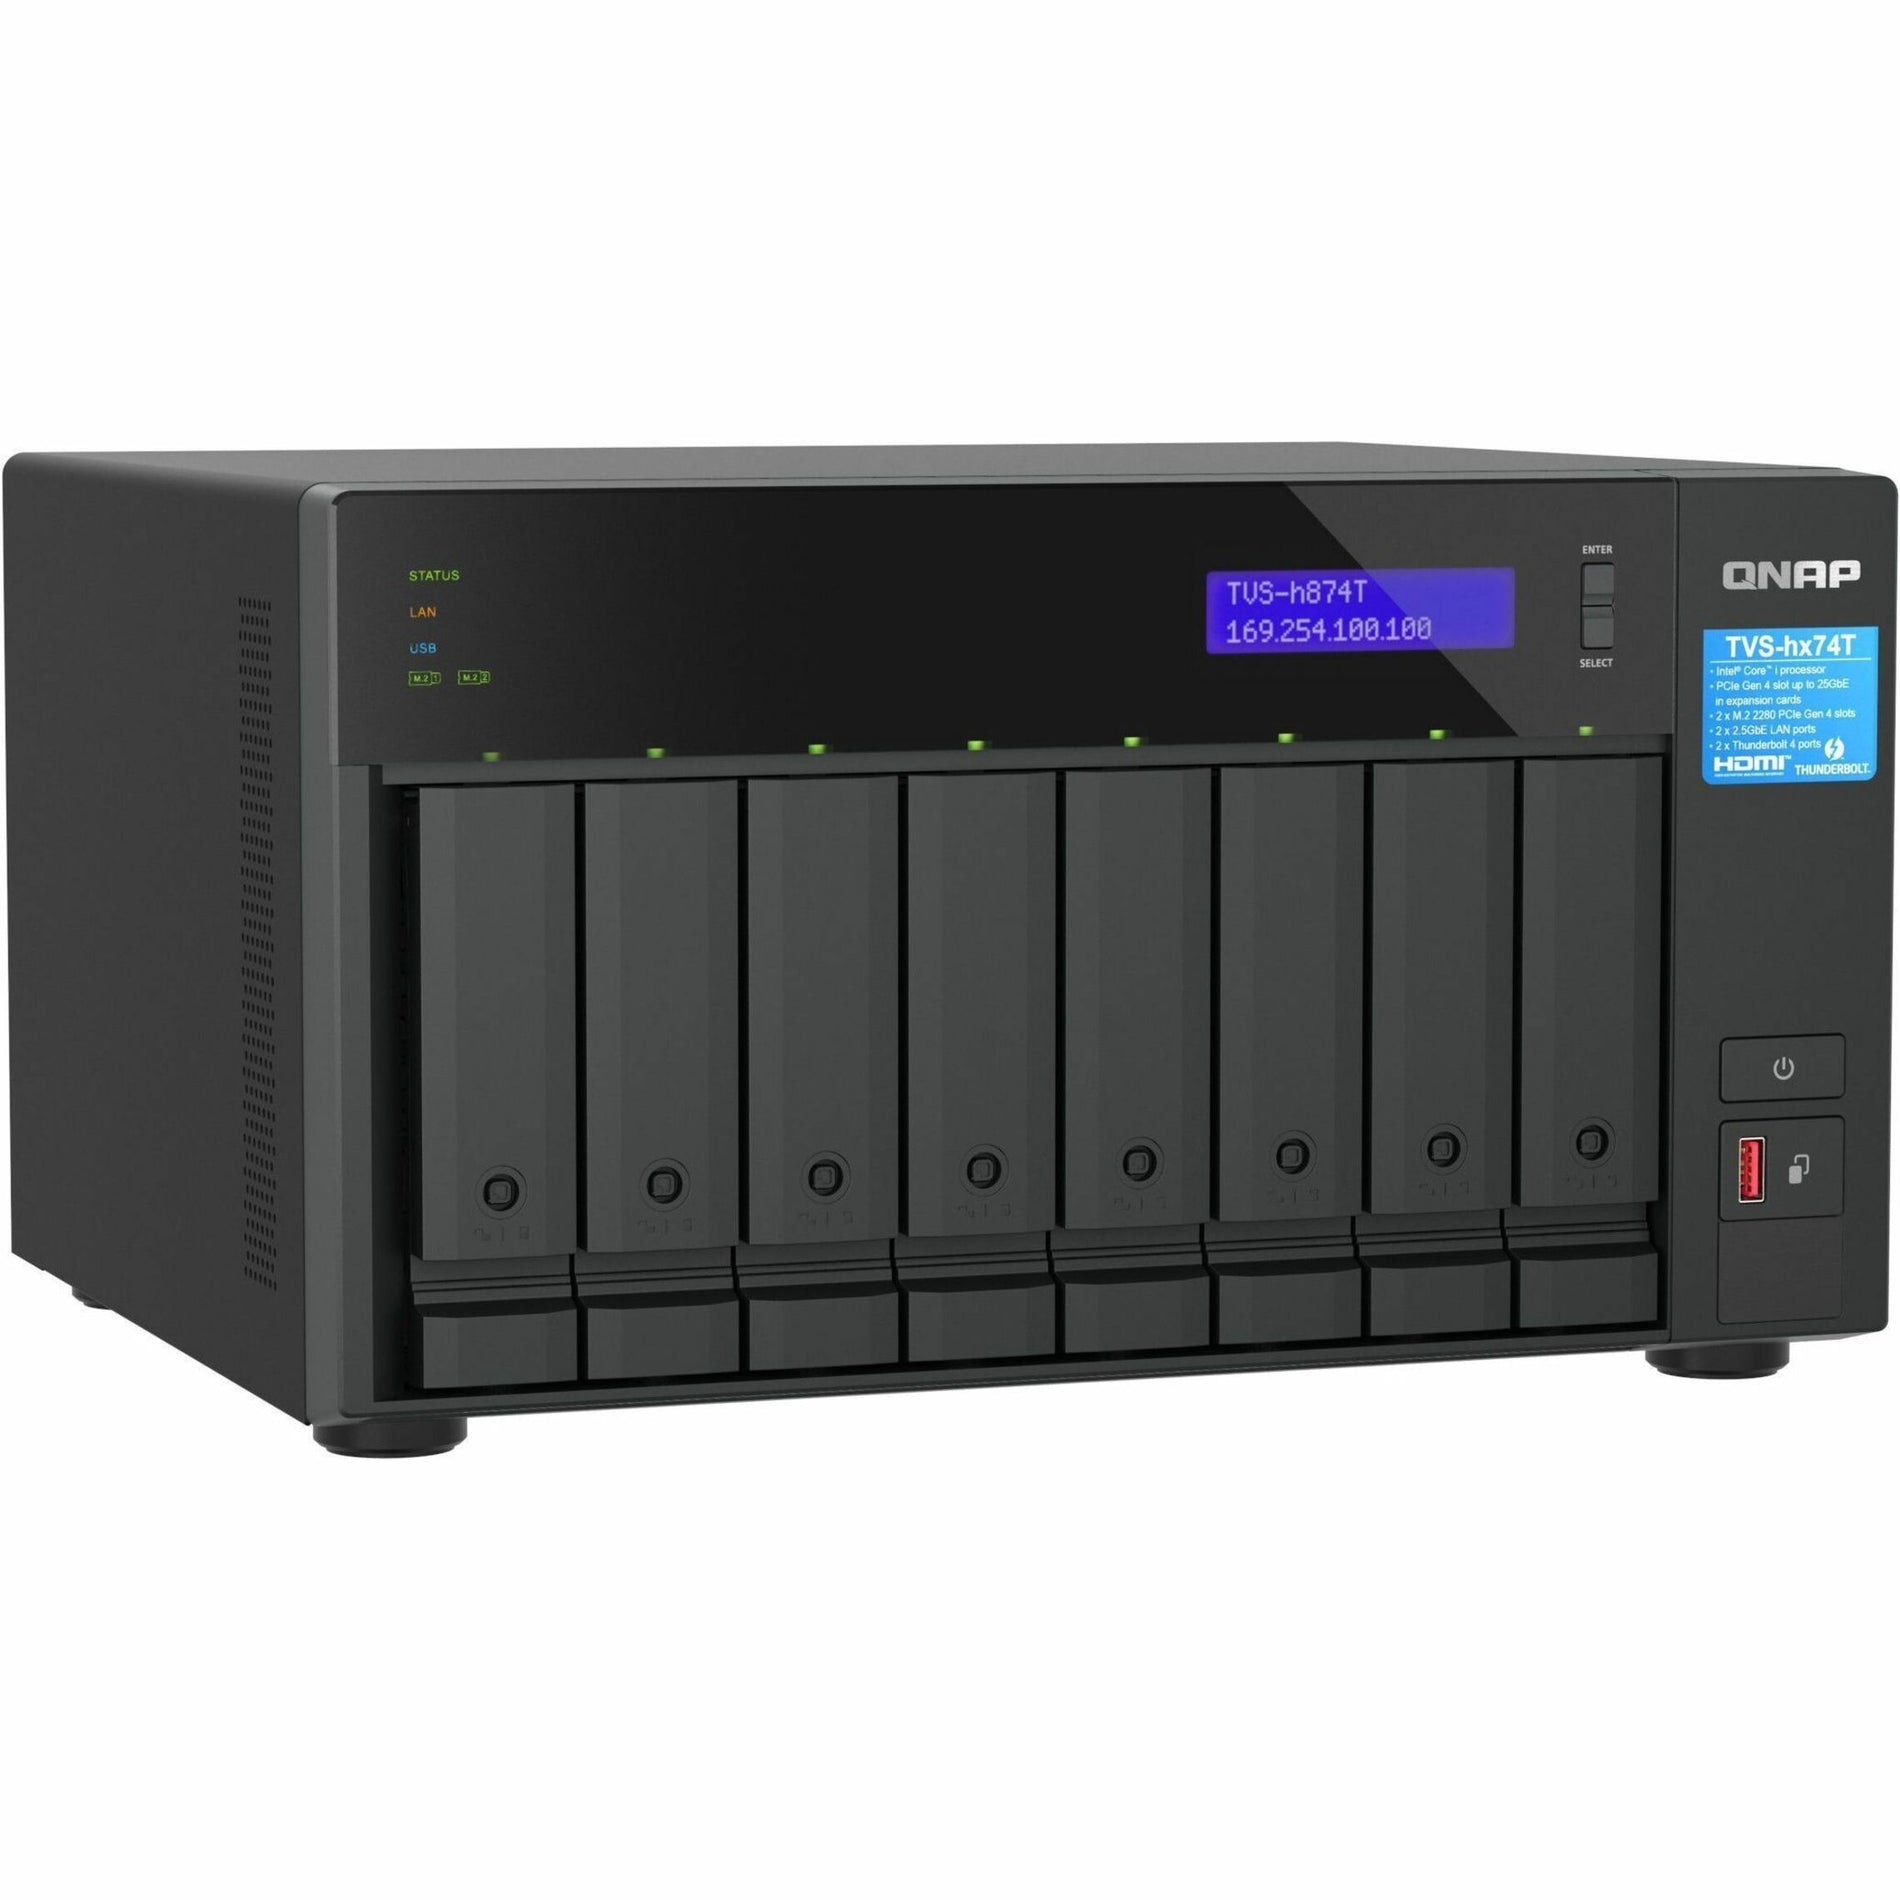 QNAP TVS-h874T-i7-32G NAS Storage System TVS-H874T-I7-32G-US TVS-h874T-i7-32G, High-Performance NAS Storage System with 32GB Memory, 8 Bays, and 2.5 Gigabit Ethernet